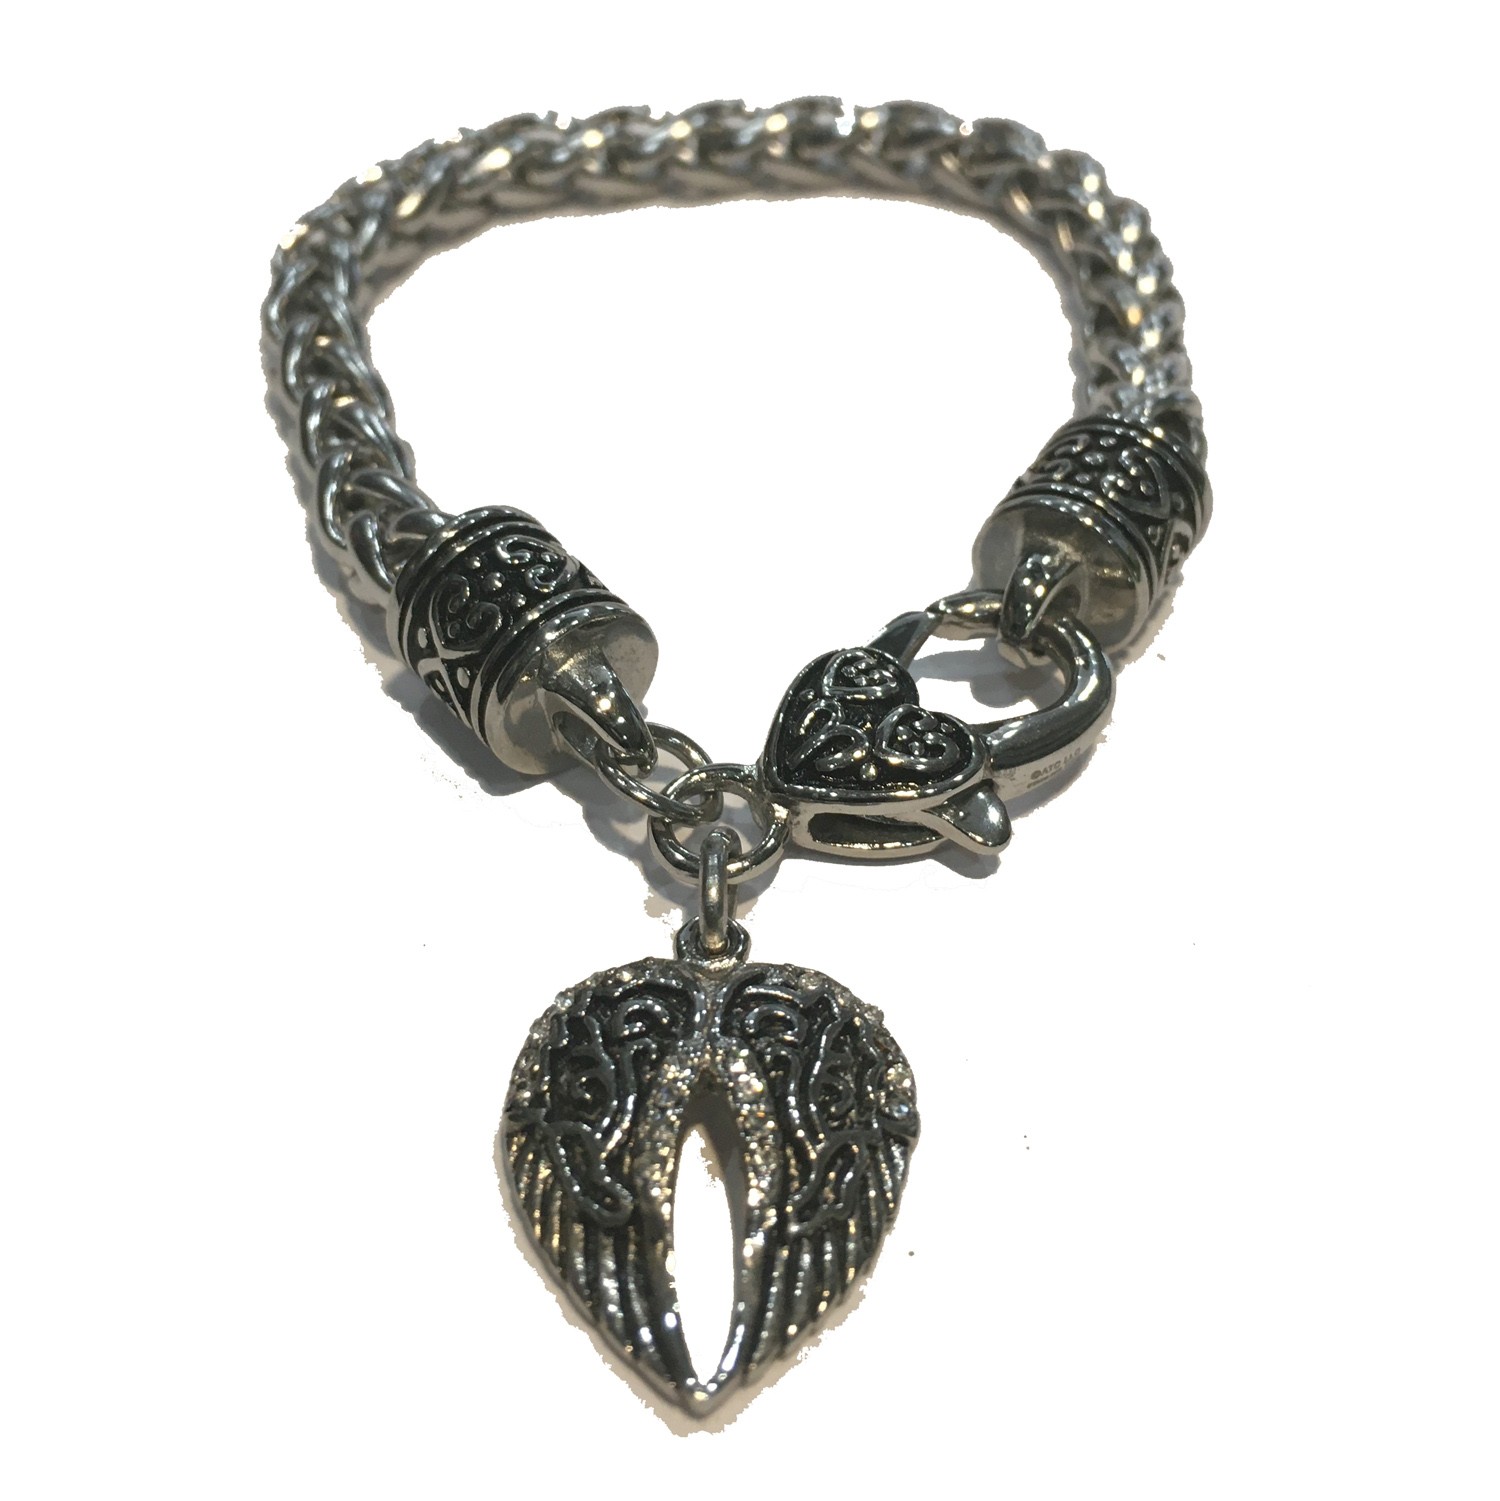 ANGEL WING ANTIQUE WITH CLEAR CRYSTALS CHARM BRACELET LADIES WITH HEART CLASP WIDE CHAIN STAINLESS STEEL 7